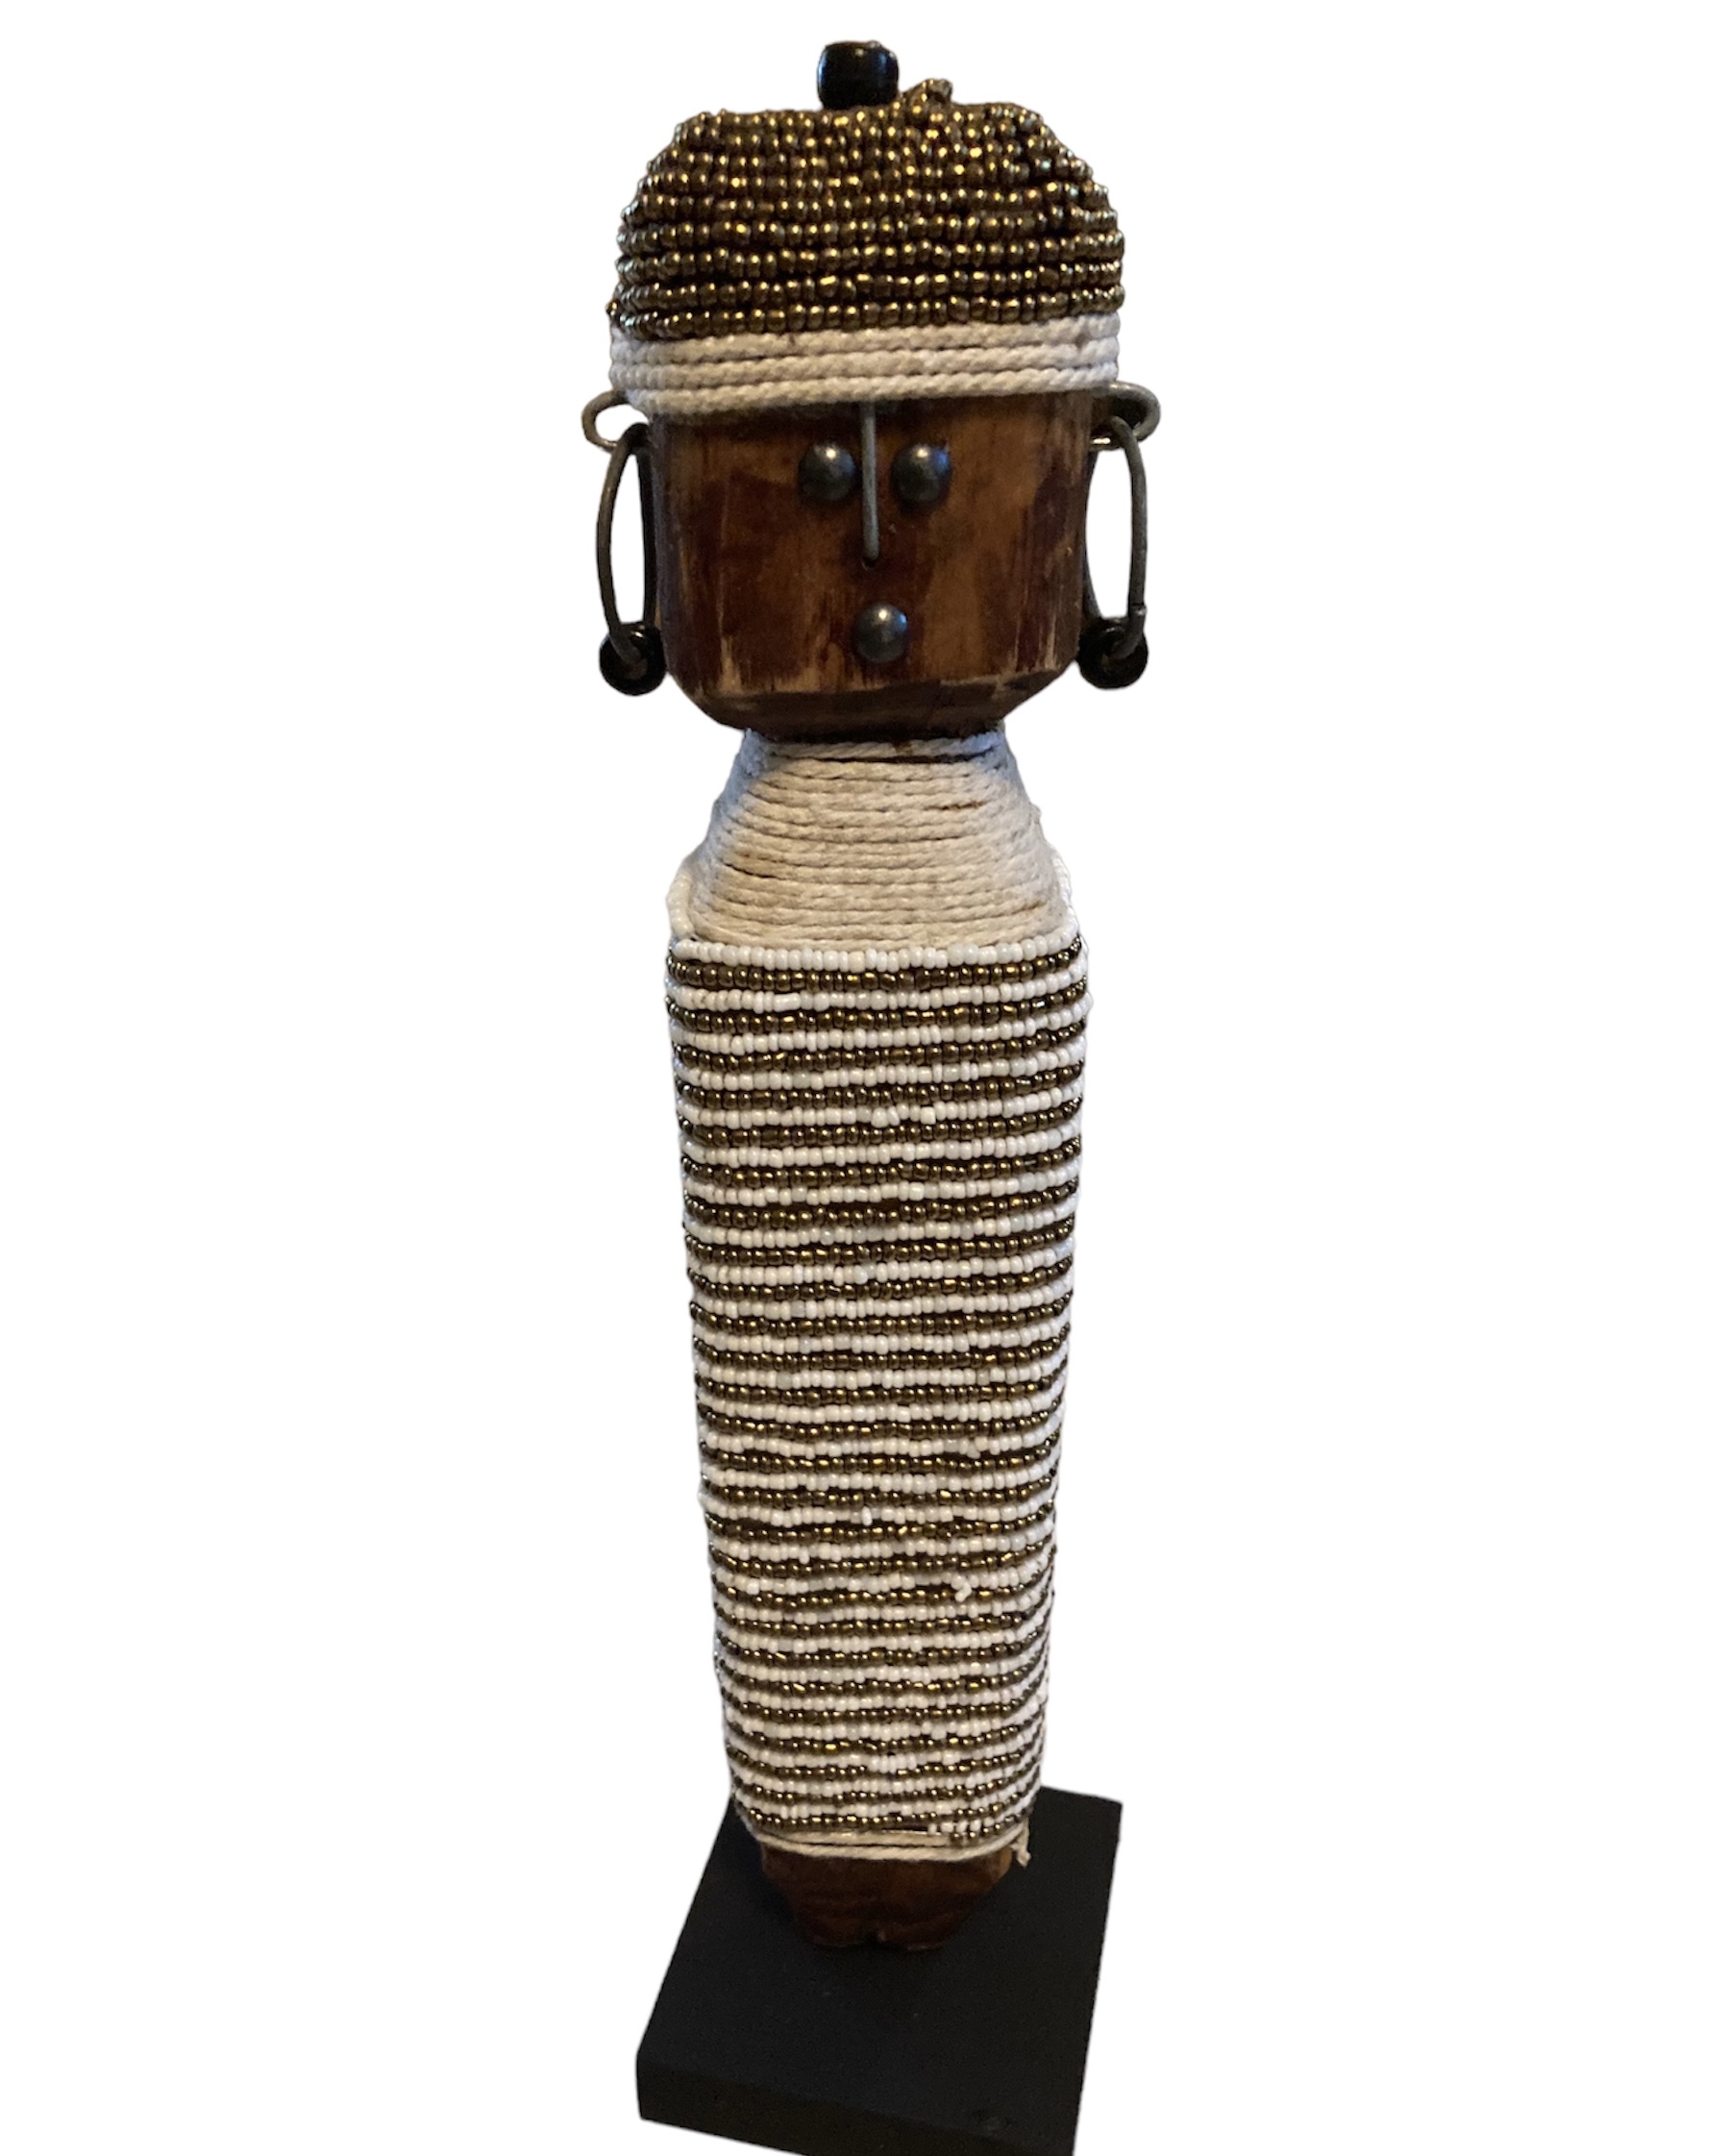 Namji Doll from Cameroon - Large - 004